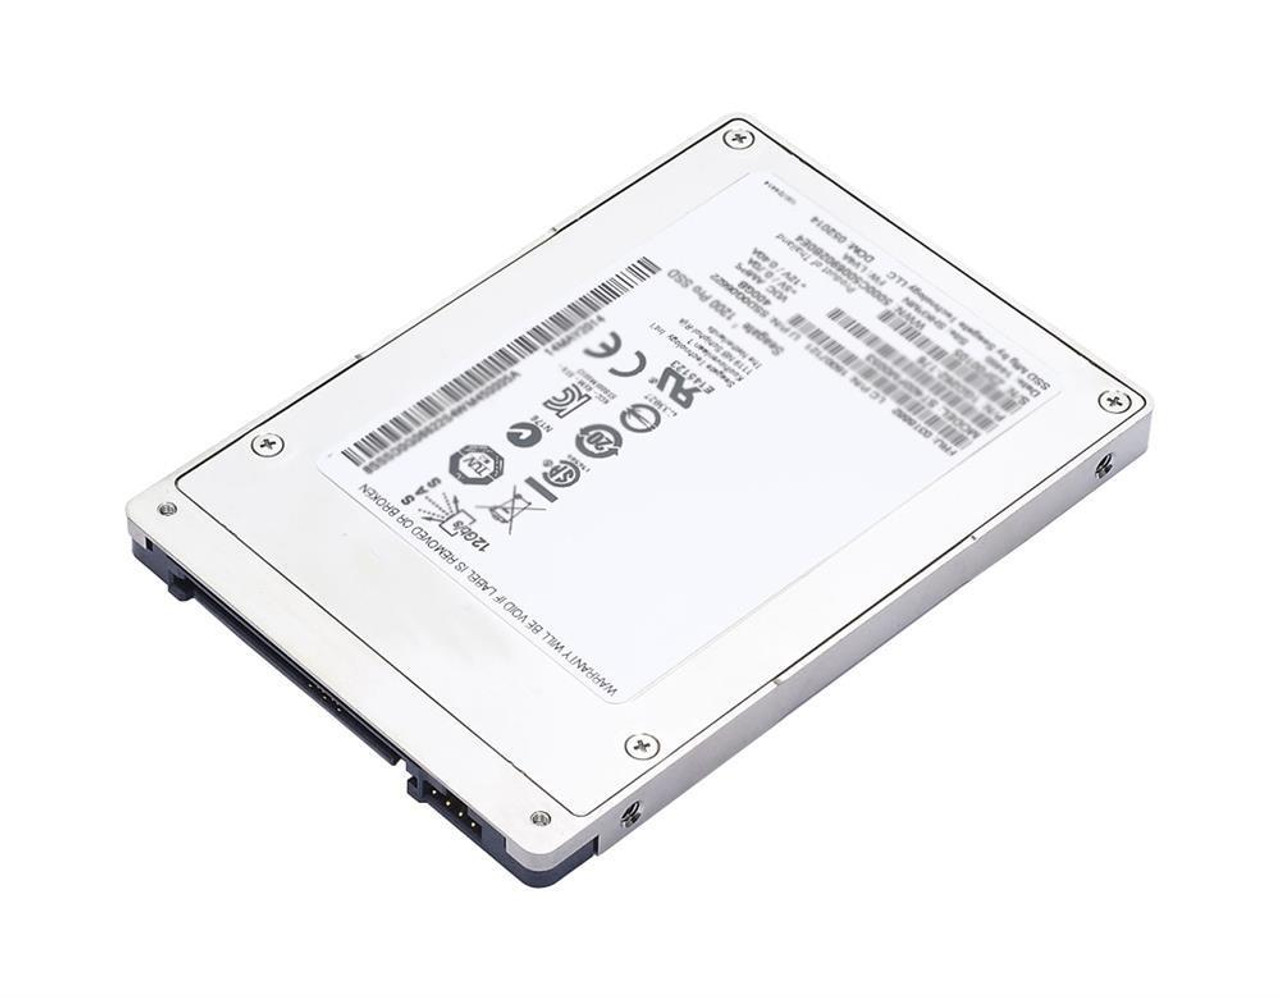 4XB0F28615-02 Lenovo 120GB MLC SATA 6Gbps Hot Swap Value Read Optimized 2.5-inch Internal Solid State Drive (SSD) for ThinkServer